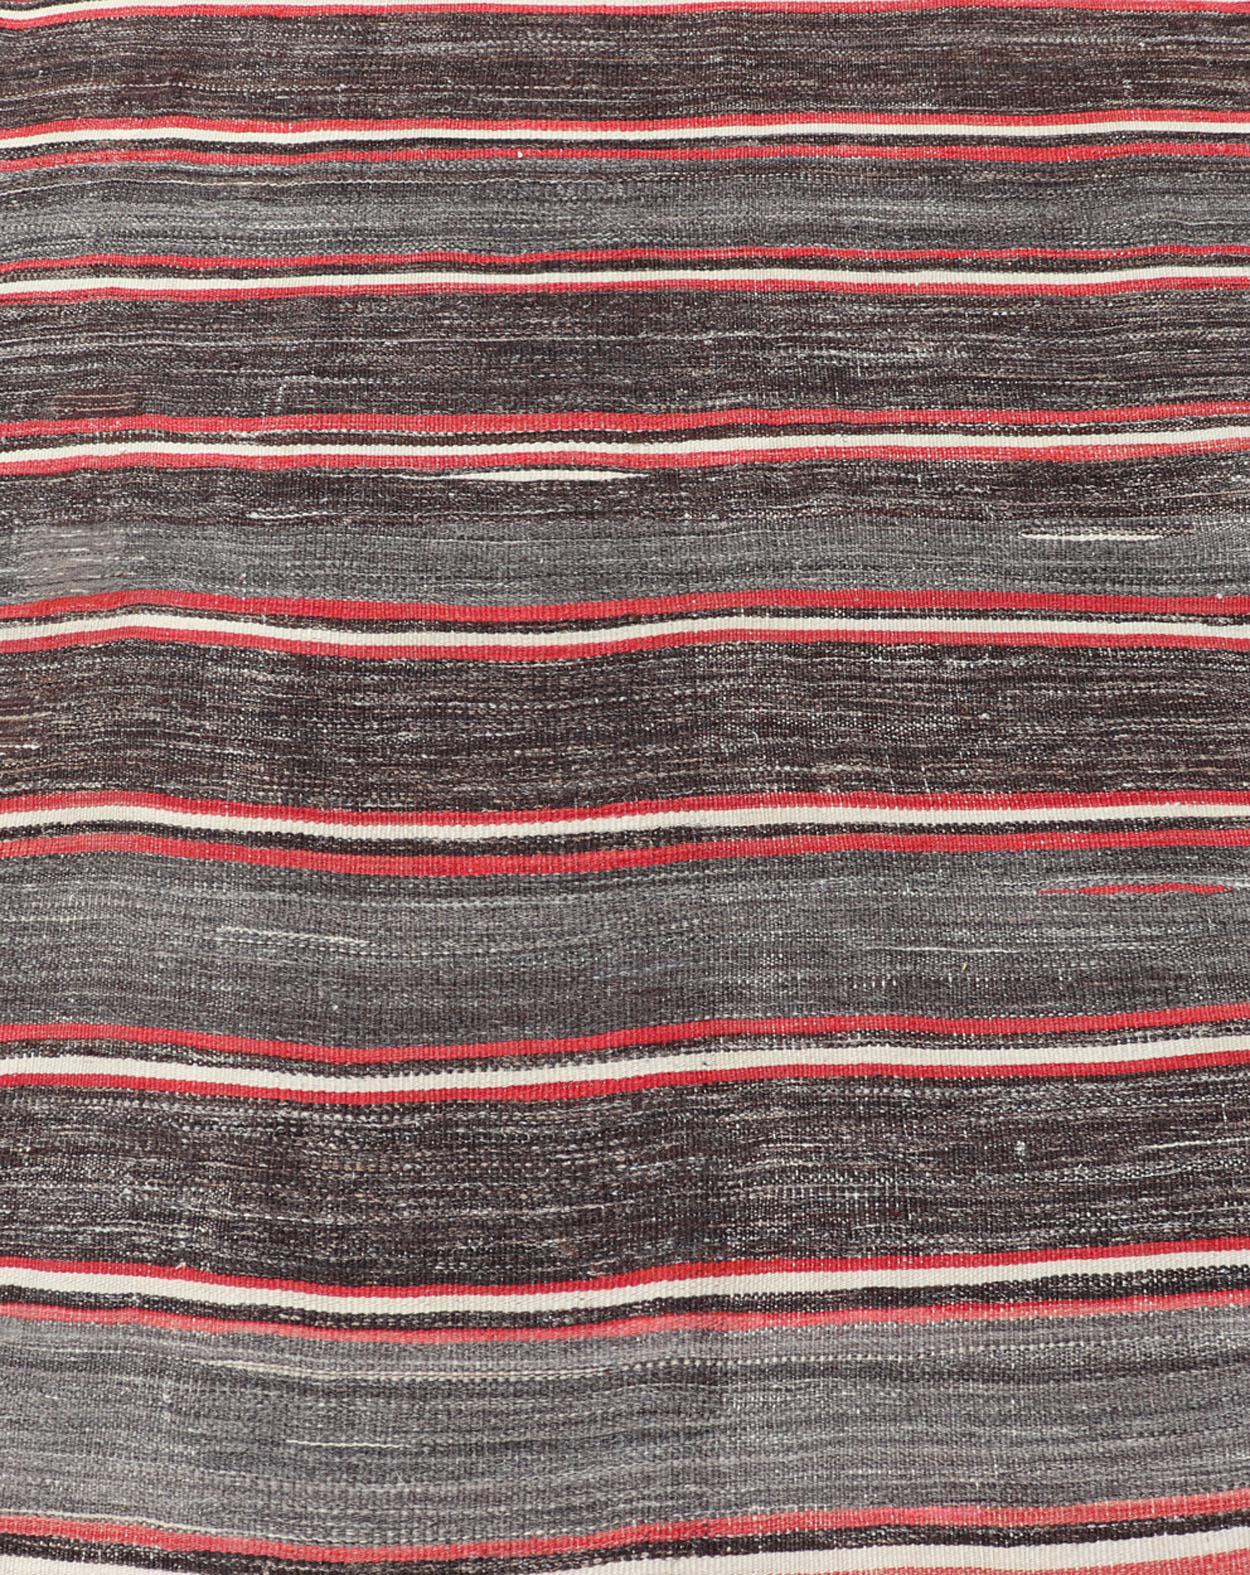 Hand-Woven Vintage Turkish Kilim Wide Runner in Gray, Coral, Brown & Charcoal with Stripes